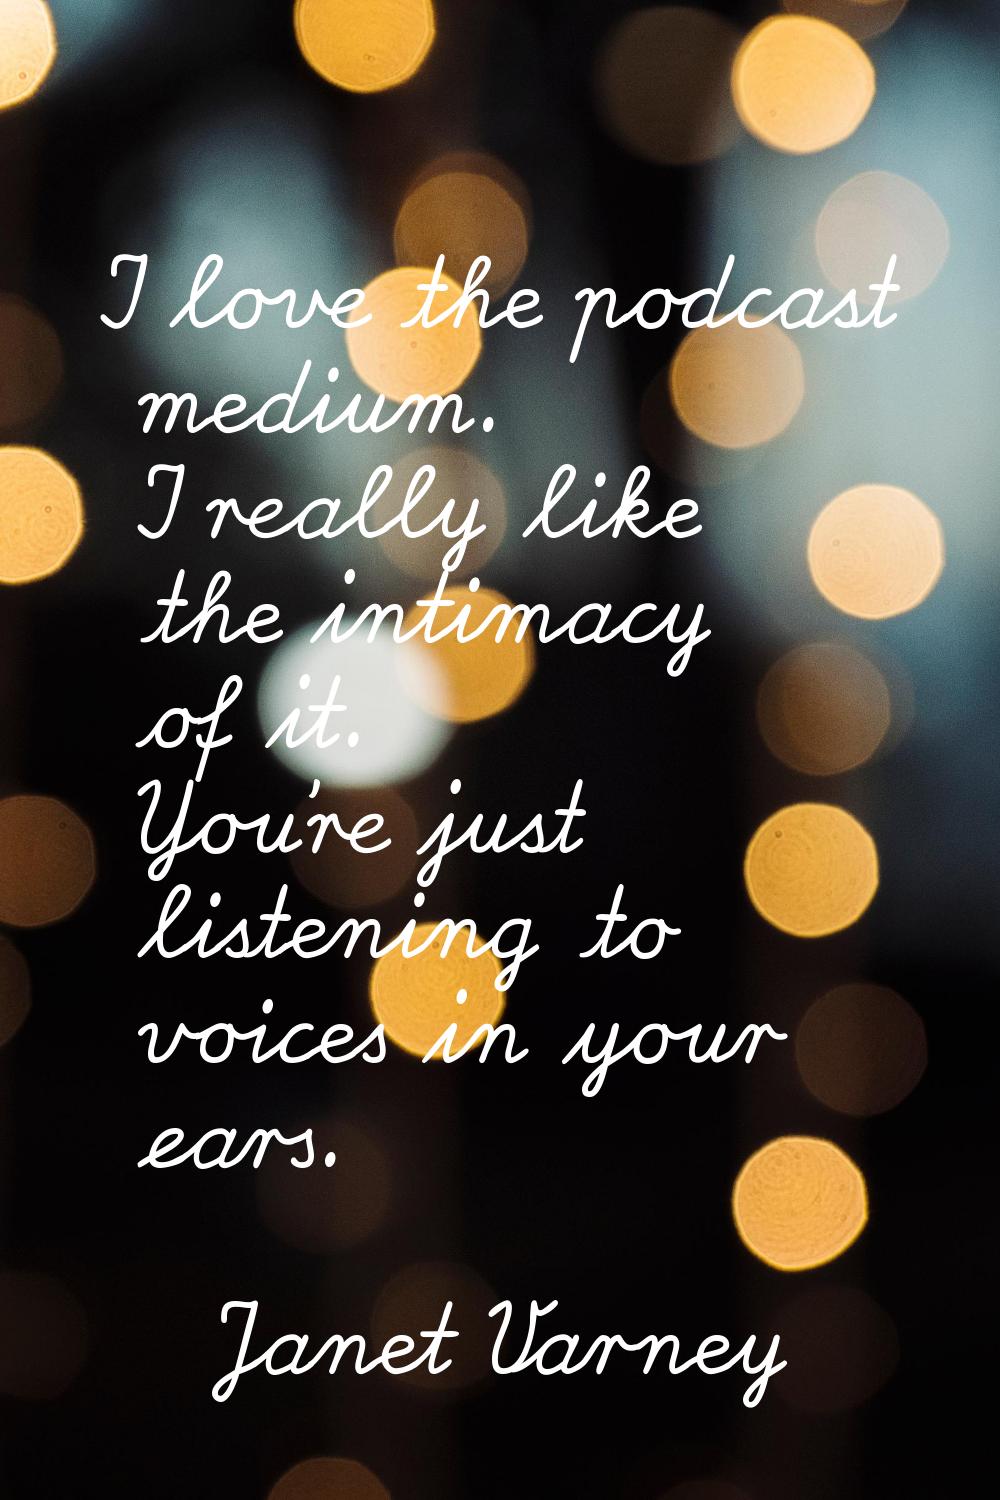 I love the podcast medium. I really like the intimacy of it. You're just listening to voices in you